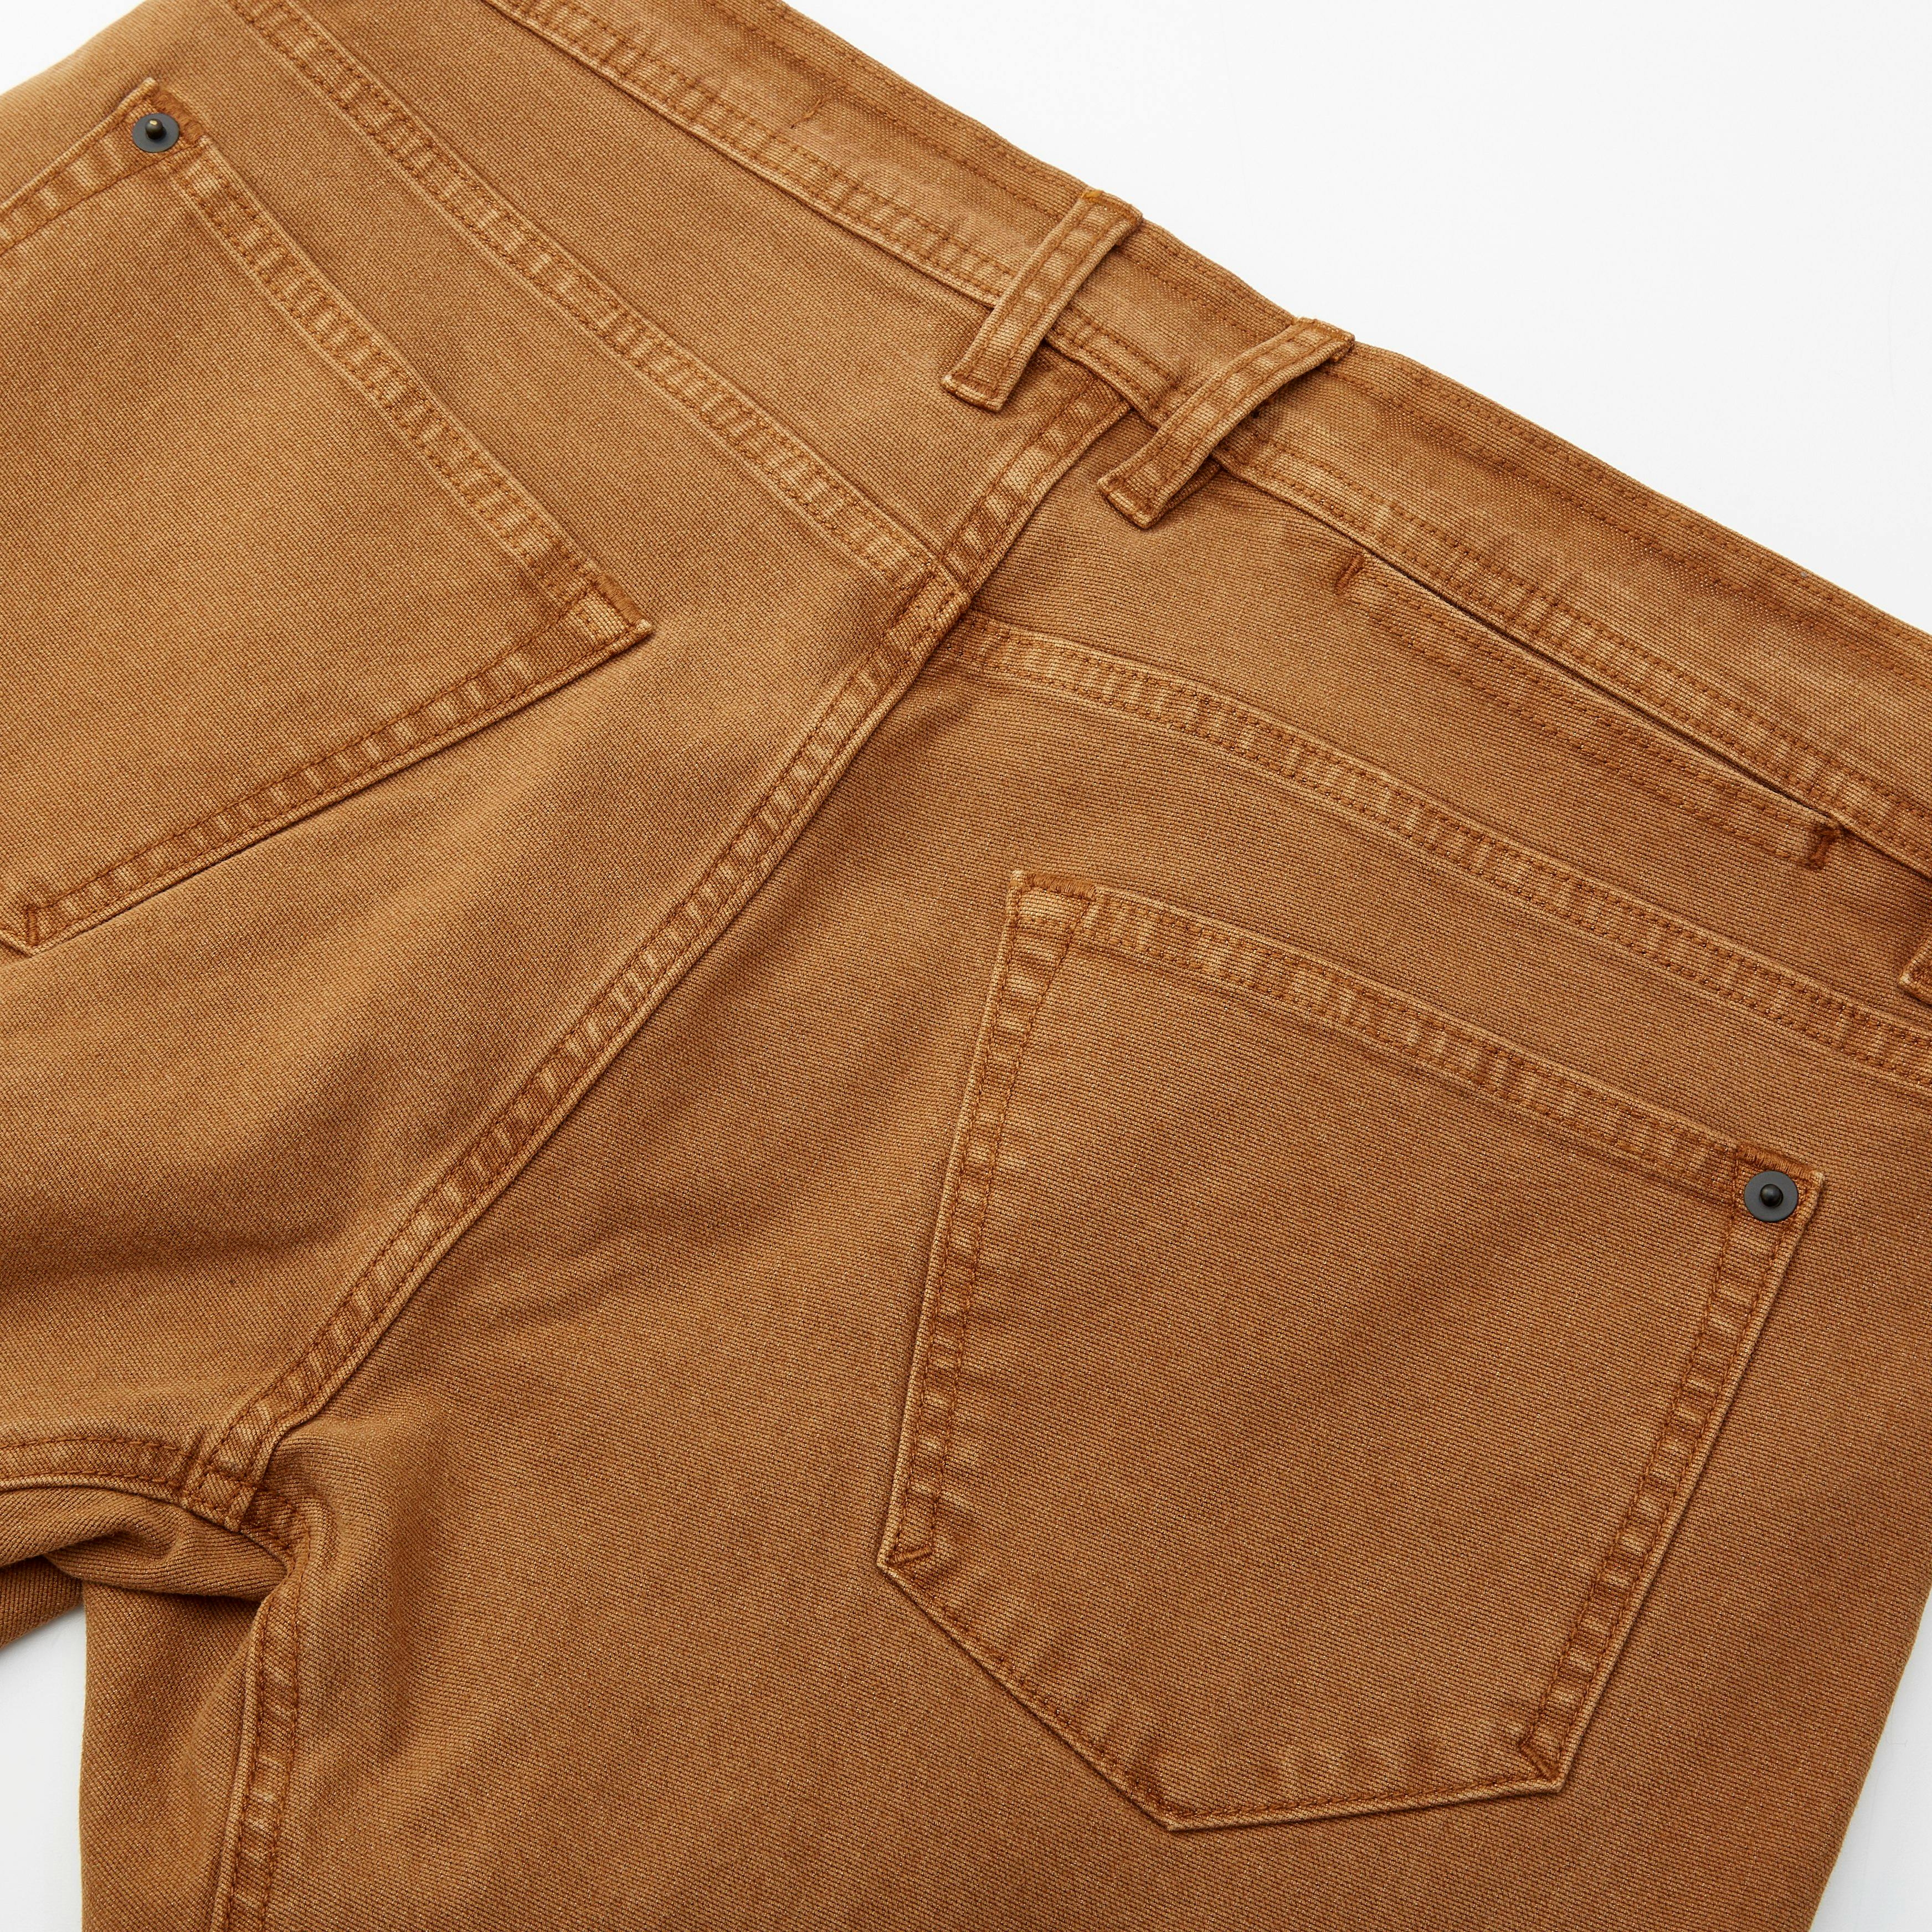 Huckberry Proof | | Pant Slim Pants Canyon Rover Double-Knee - Work Work -